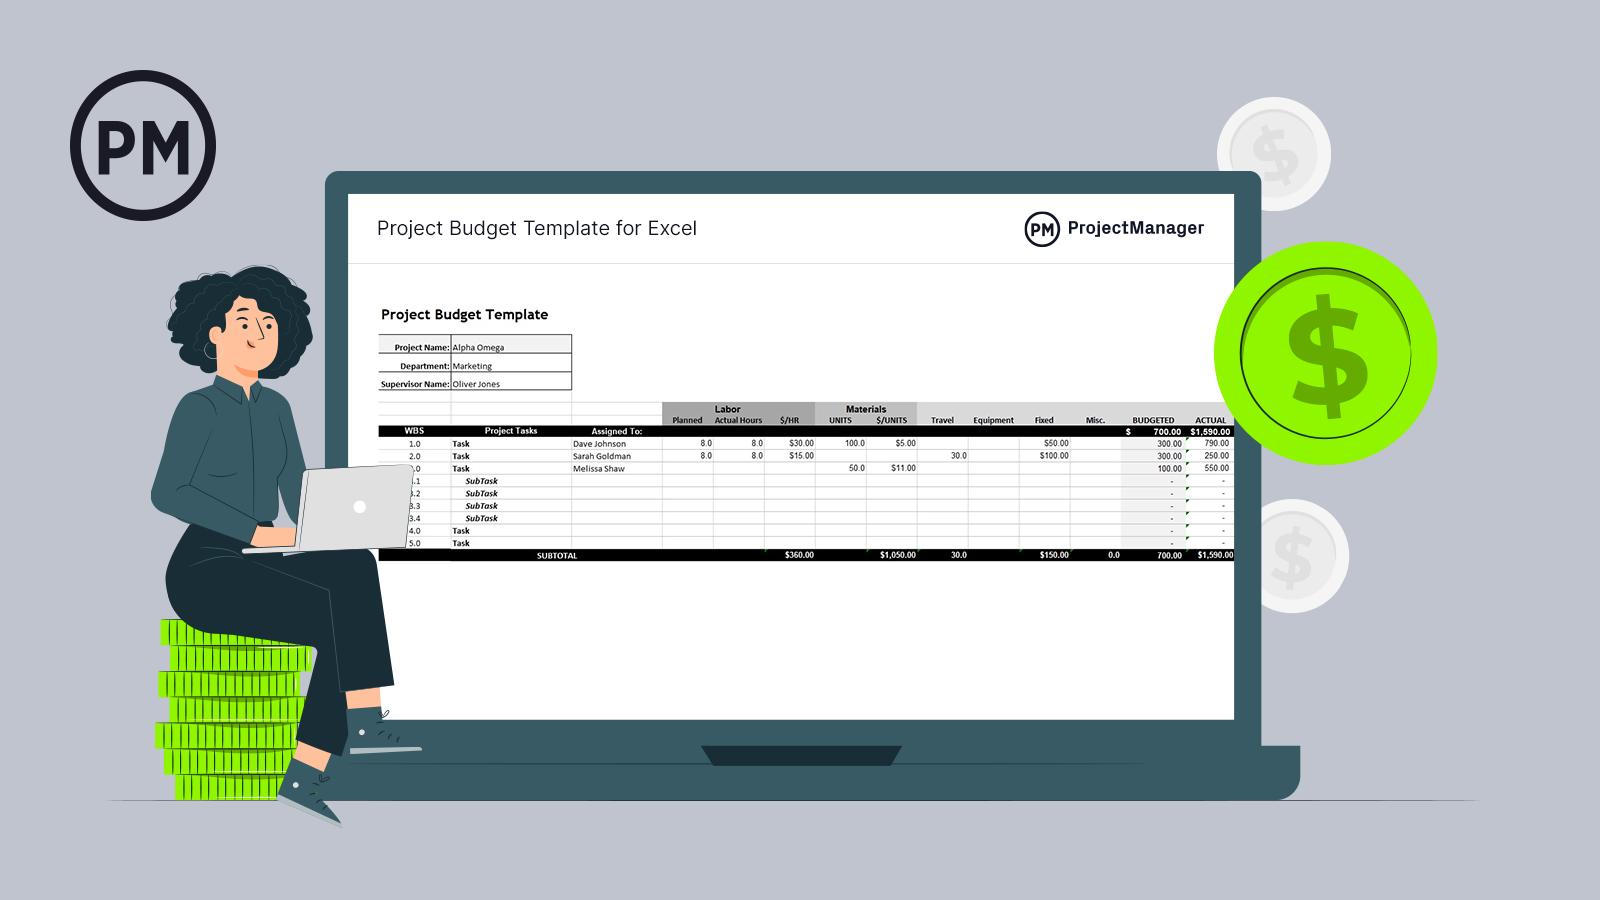 Project Budget Template for Excel (Free Download) - ProjectManager